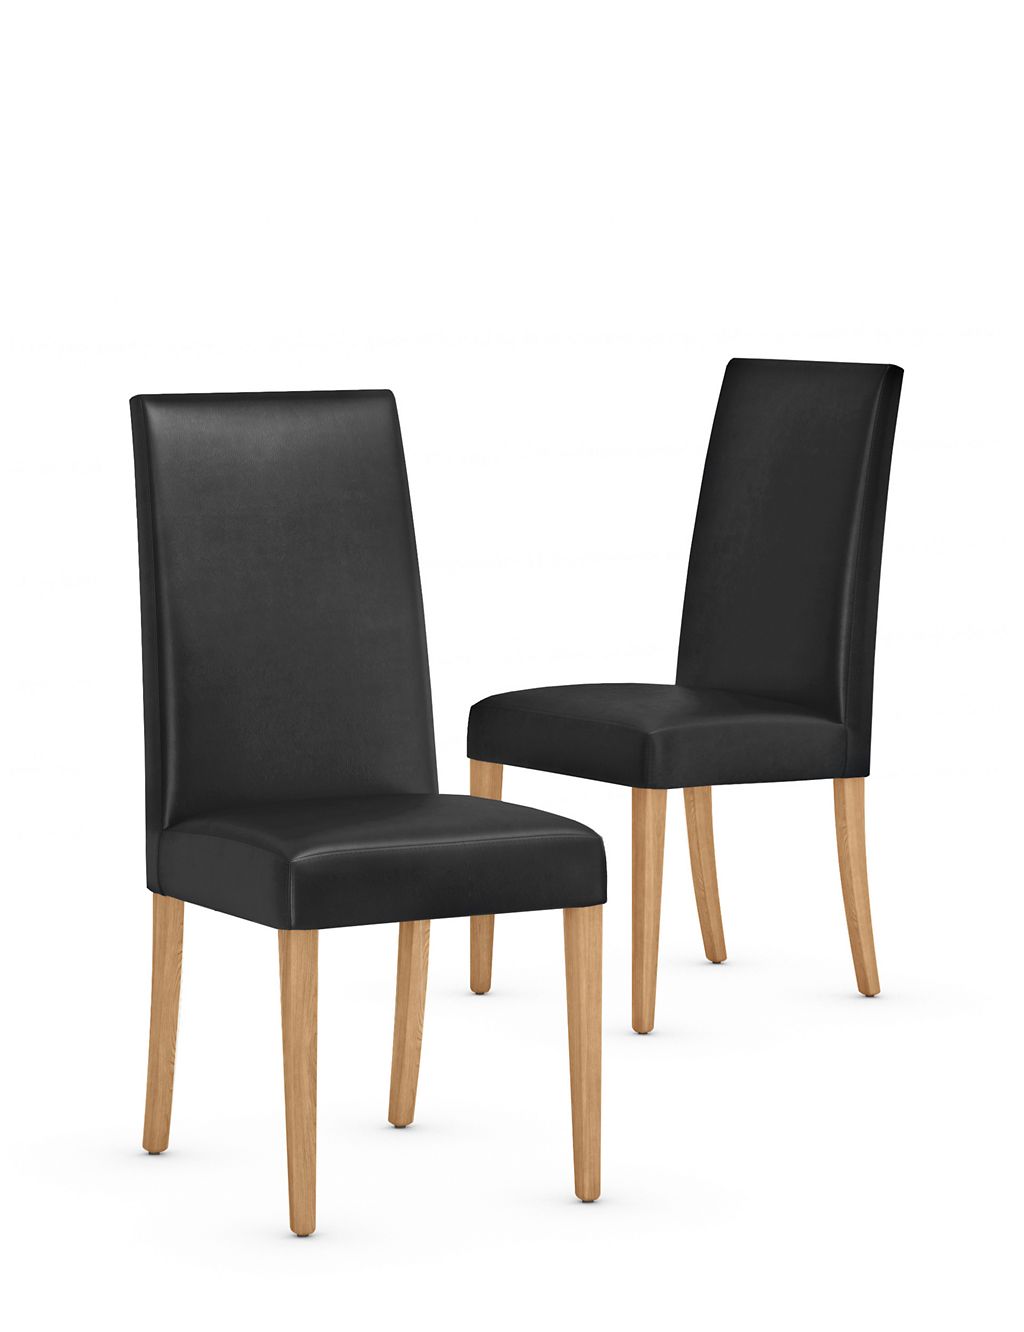 Set of 2 Alton Black Leather Dining Chair 3 of 6